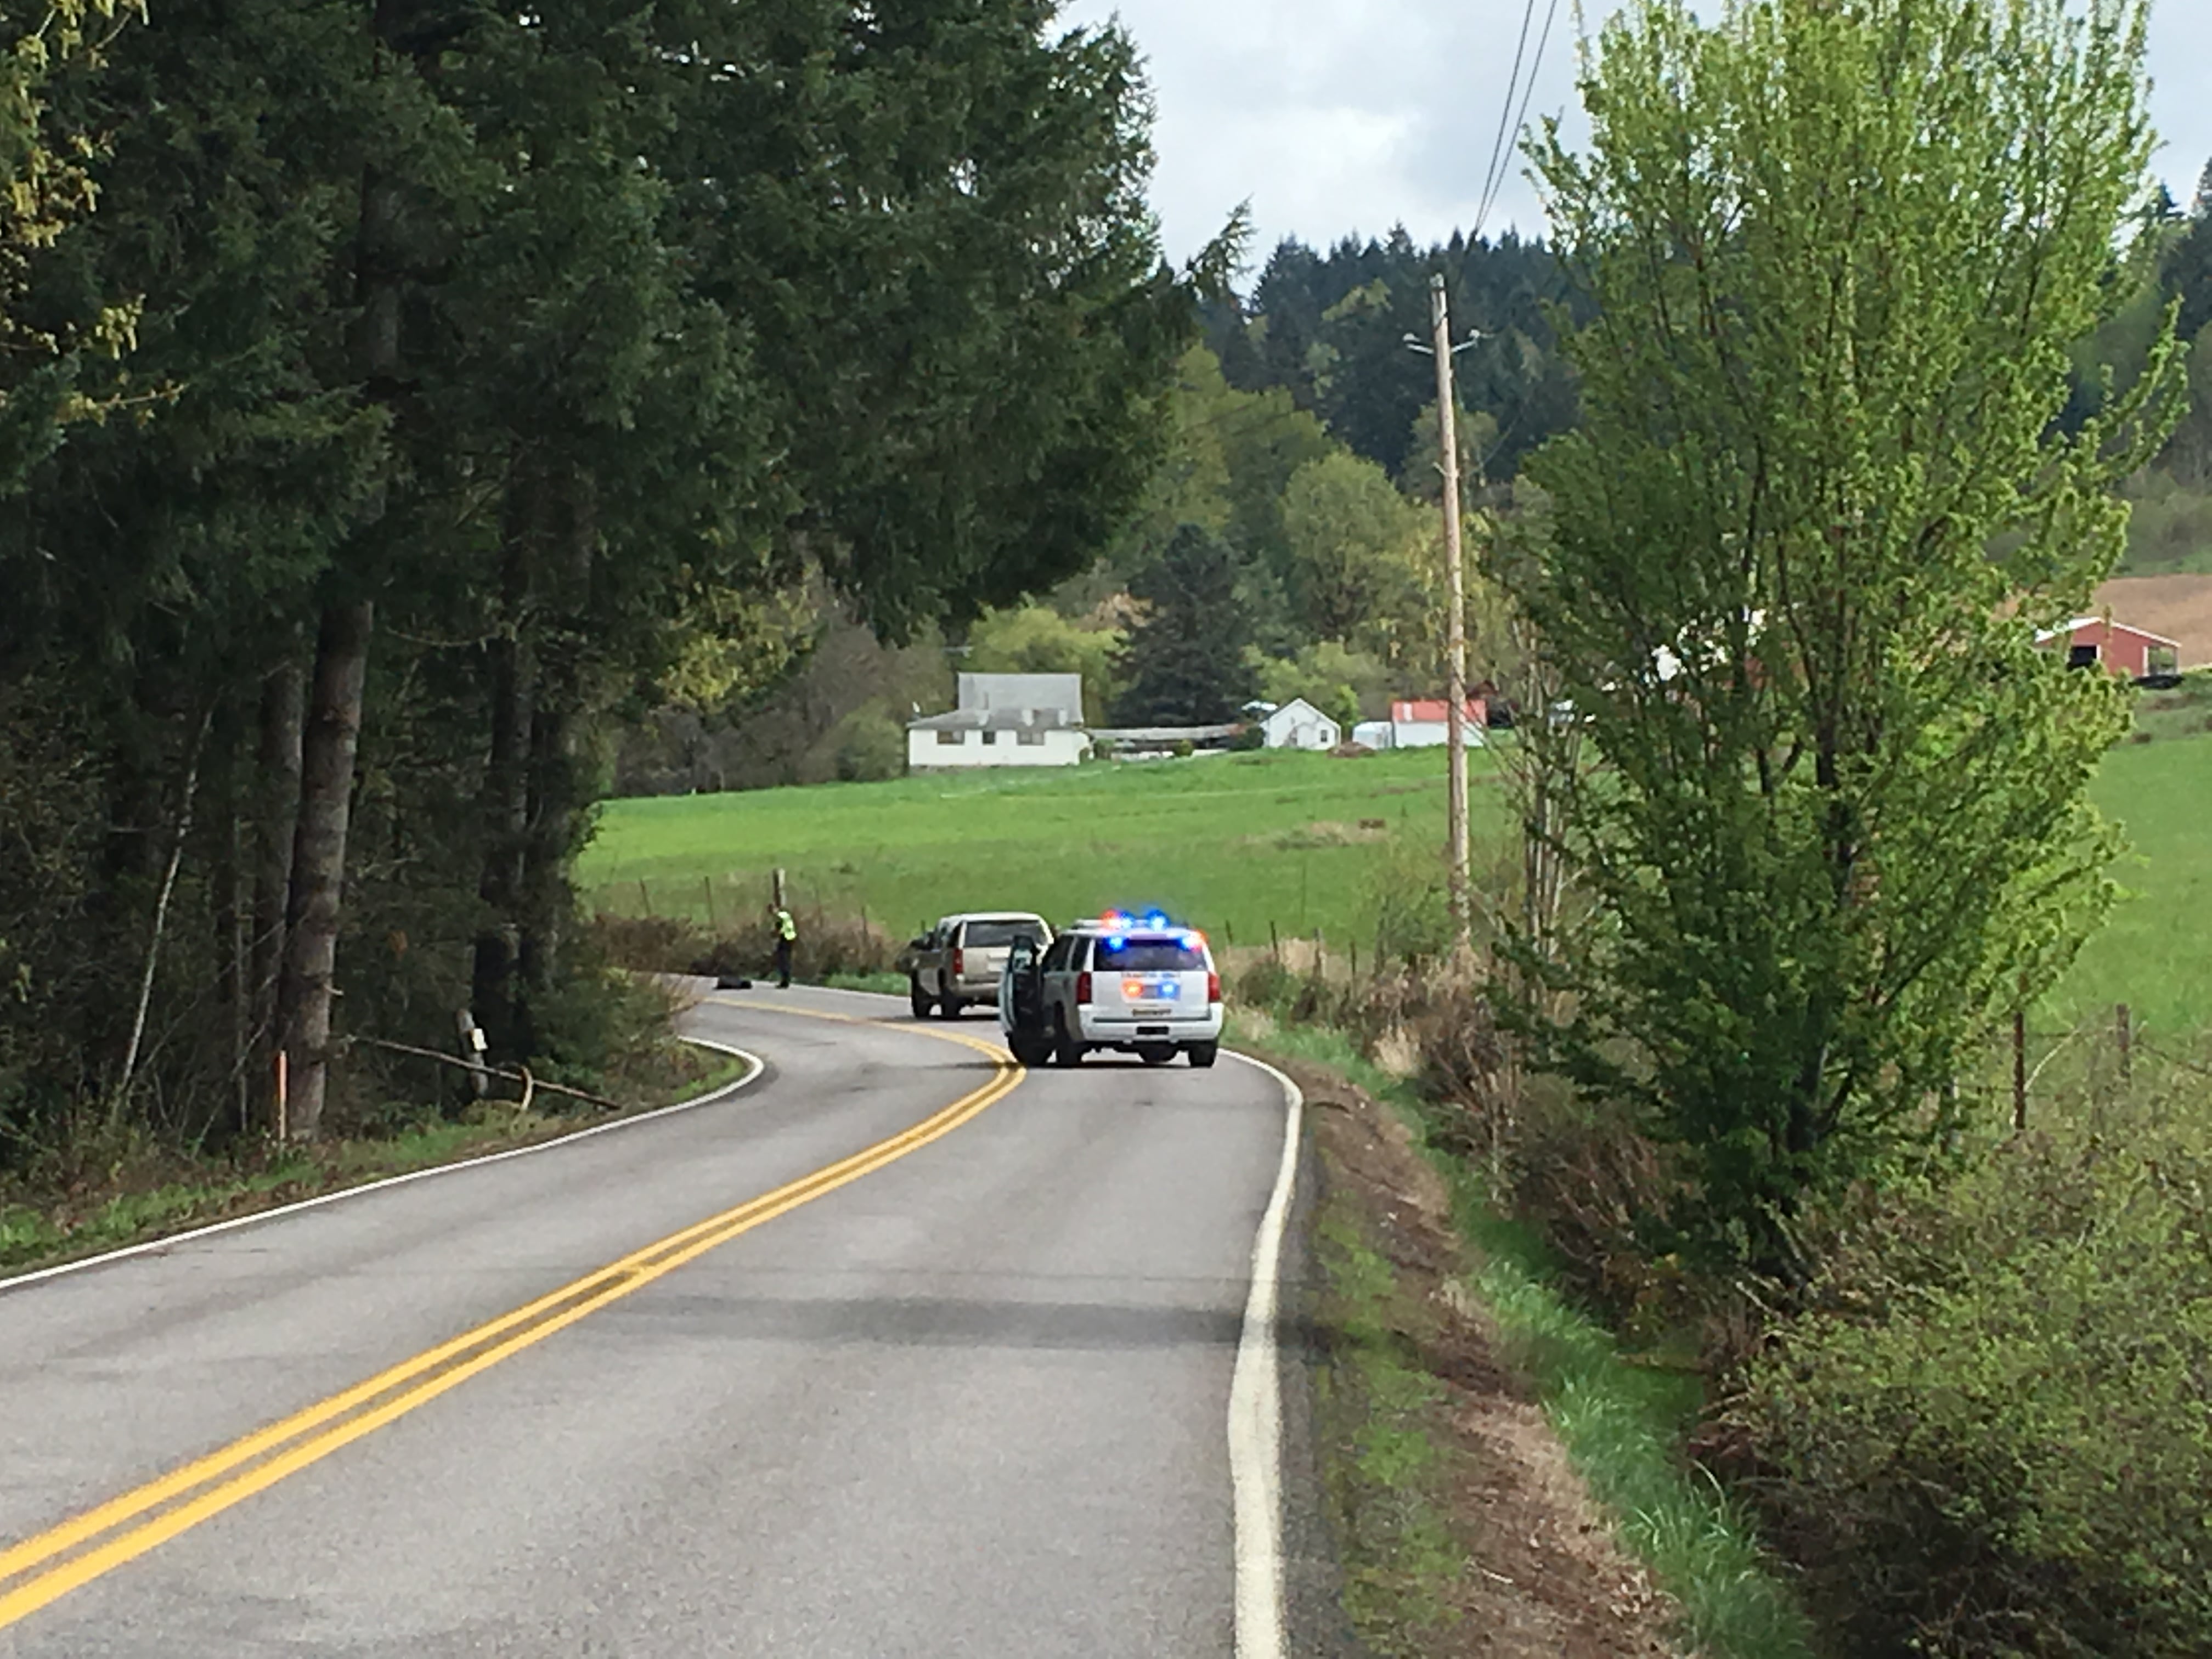 Sheriff's deputies investigating a crash that occurred Saturday morning.